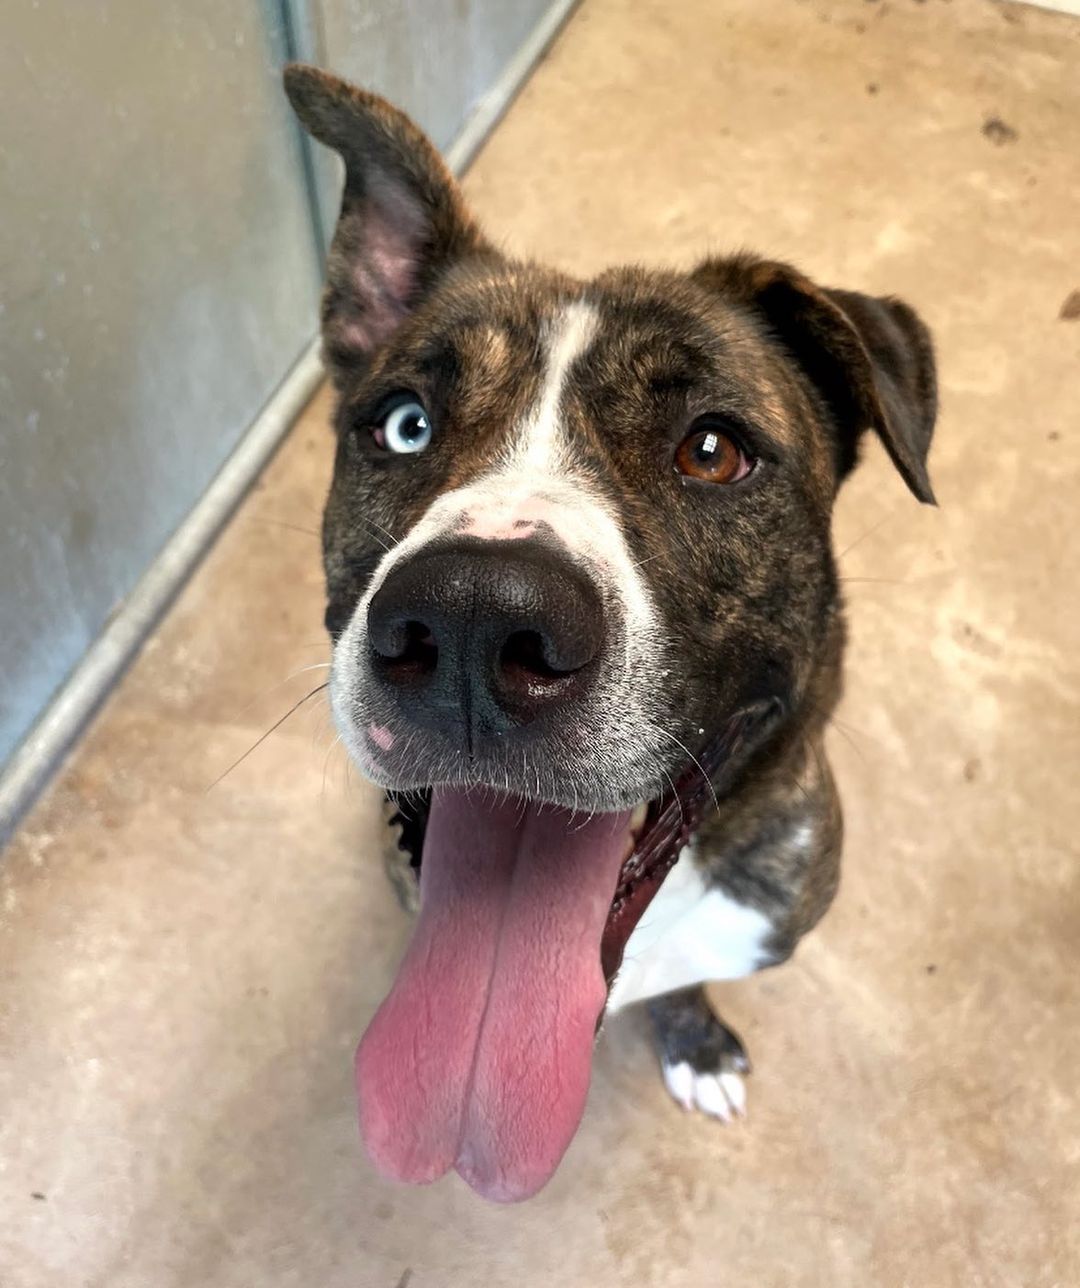 He’s unBEARably CUTE! 😍

Bear is a friendly, goofy Husky/Pit mix with lots of playful energy. He was born in early 2019. This beautiful bi-color eyed boy was surrendered because he was not good with cats his previous home. We were told he was good with the other dog and the 7-8 yr old children in the home. He has been fine with the other dogs at the shelter. If you are active and like to play with and exercise with dogs, Bear may be the right fit for you! Bear is neutered, vaccinated, chipped & told he's housebroken. If interested please contact Vicki@nokillarc.org or 570-784-3669 ext 1

<a target='_blank' href='https://www.instagram.com/explore/tags/adoptdontshop/'>#adoptdontshop</a> <a target='_blank' href='https://www.instagram.com/explore/tags/huskypit/'>#huskypit</a> <a target='_blank' href='https://www.instagram.com/explore/tags/huskiesofinstagram/'>#huskiesofinstagram</a> <a target='_blank' href='https://www.instagram.com/explore/tags/pitbullsofinstagram/'>#pitbullsofinstagram</a> <a target='_blank' href='https://www.instagram.com/explore/tags/pitbulls/'>#pitbulls</a> <a target='_blank' href='https://www.instagram.com/explore/tags/dontbullymybreed/'>#dontbullymybreed</a> <a target='_blank' href='https://www.instagram.com/explore/tags/adopt/'>#adopt</a> <a target='_blank' href='https://www.instagram.com/explore/tags/shelterdogsofinstagram/'>#shelterdogsofinstagram</a> <a target='_blank' href='https://www.instagram.com/explore/tags/shelterdogs/'>#shelterdogs</a> <a target='_blank' href='https://www.instagram.com/explore/tags/rescuedismyfavoritebreed/'>#rescuedismyfavoritebreed</a> <a target='_blank' href='https://www.instagram.com/explore/tags/bloomsburg/'>#bloomsburg</a> <a target='_blank' href='https://www.instagram.com/explore/tags/pennsylvania/'>#pennsylvania</a>